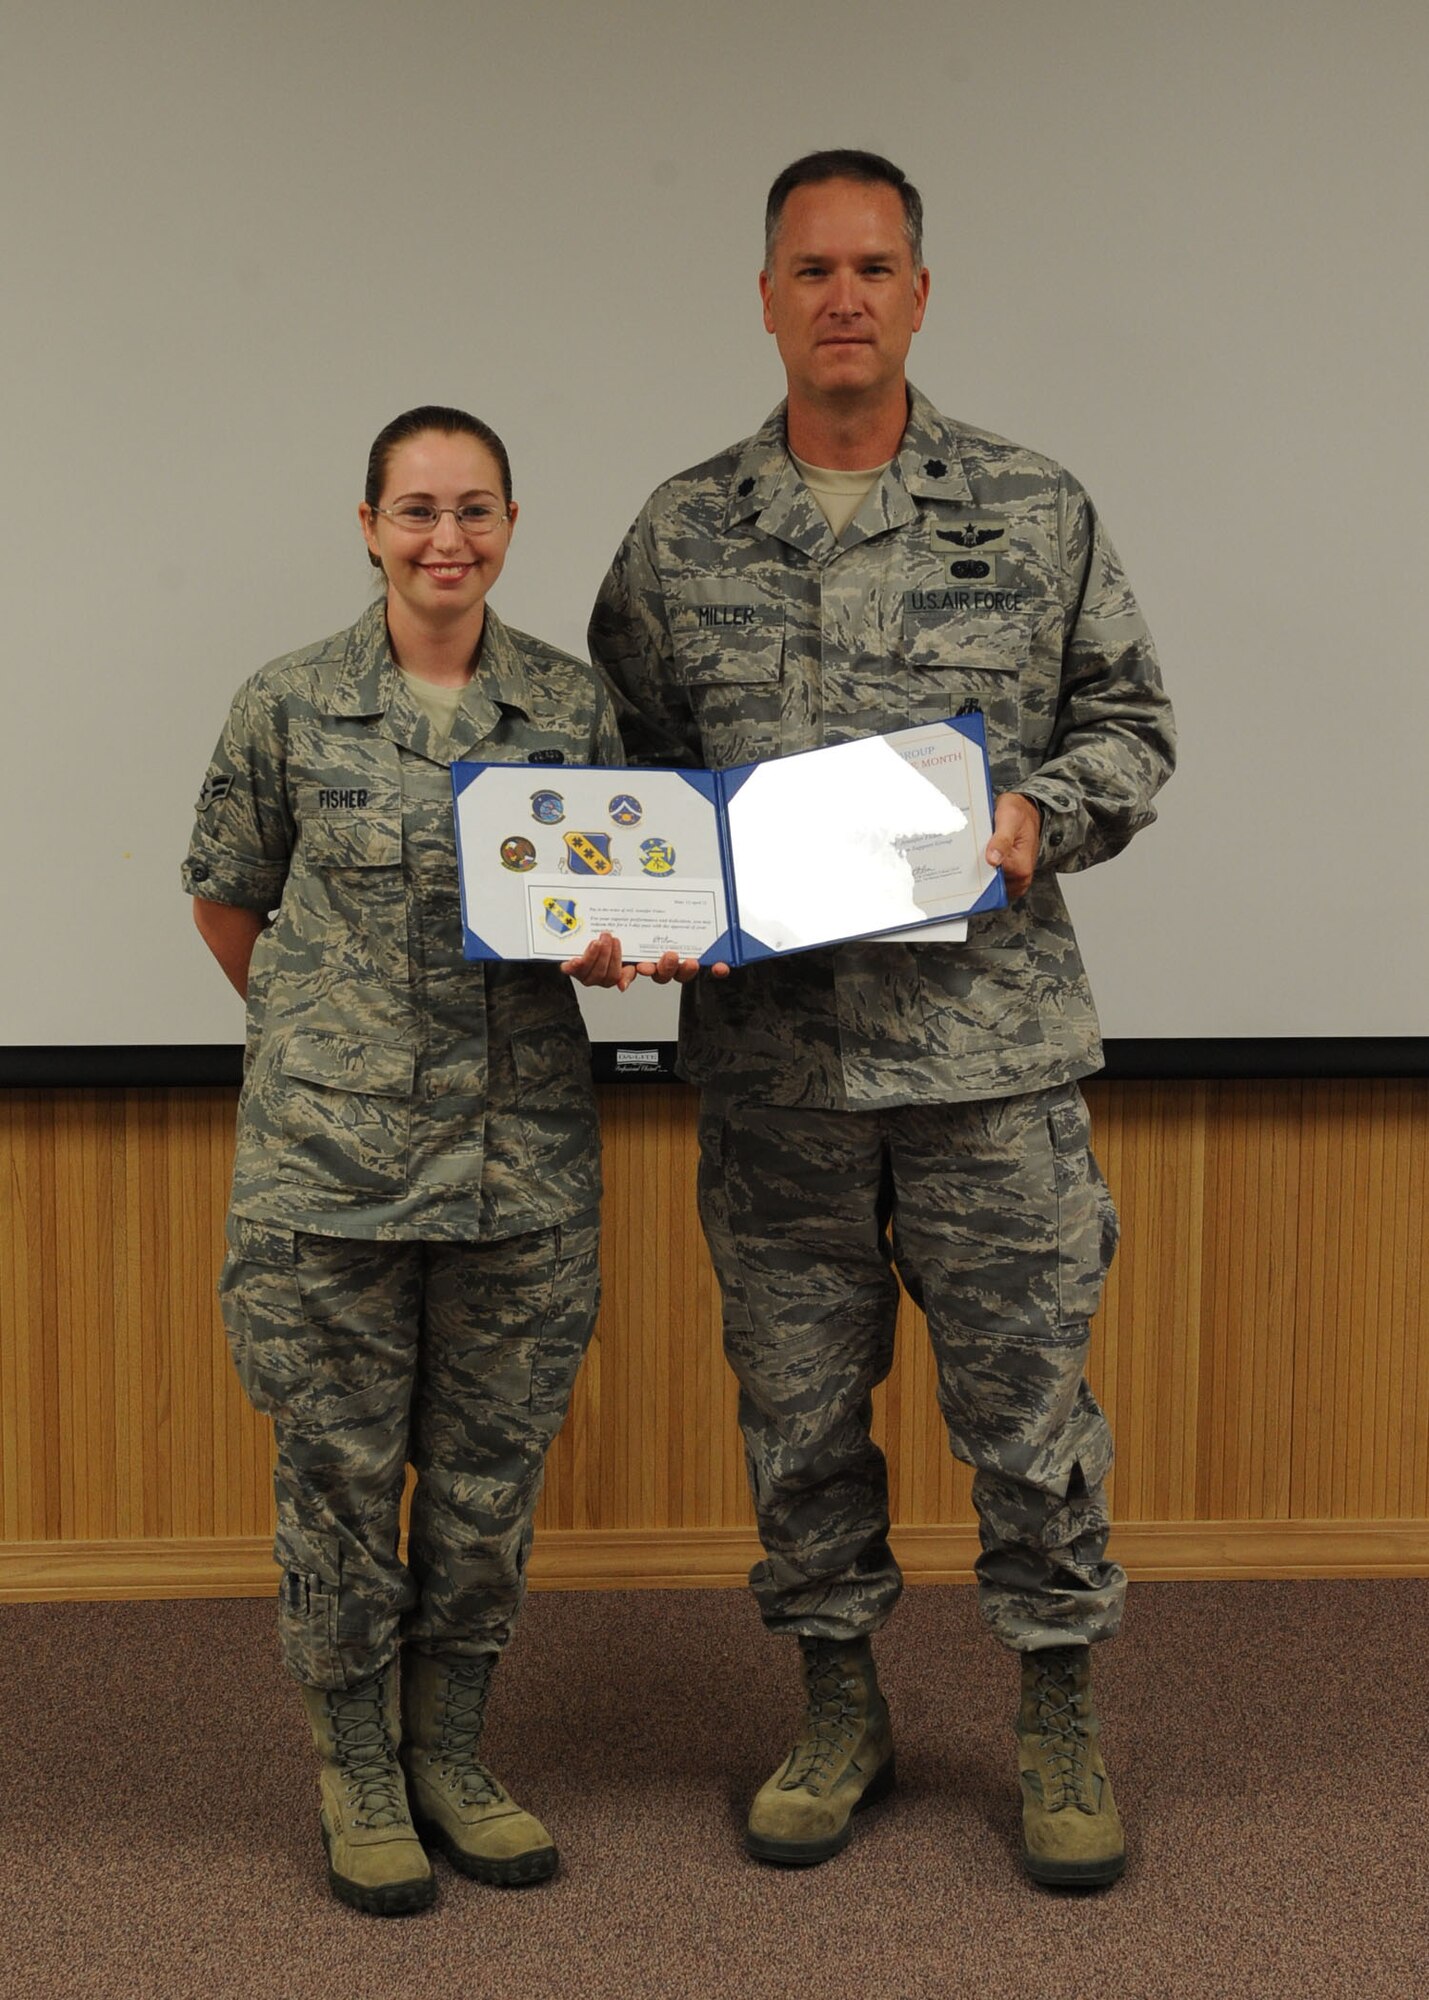 Airman 1st Class Jennifer Fisher, 7th Mission Support Group, receives the 7th MSG’s superior performer of the month award from Lt. Col. Michael Miller, 7th Mission Support Group deputy commander April 12, 2012, at Dyess Air Force Base, Texas. Fisher was recognized for her work on the correspondents tracking system and having the highest score in the 7th Bomb Wing for the staff assistance visit inspection. (U.S. Air Force photo by Airman 1st Class Peter Thompson/ Released)  